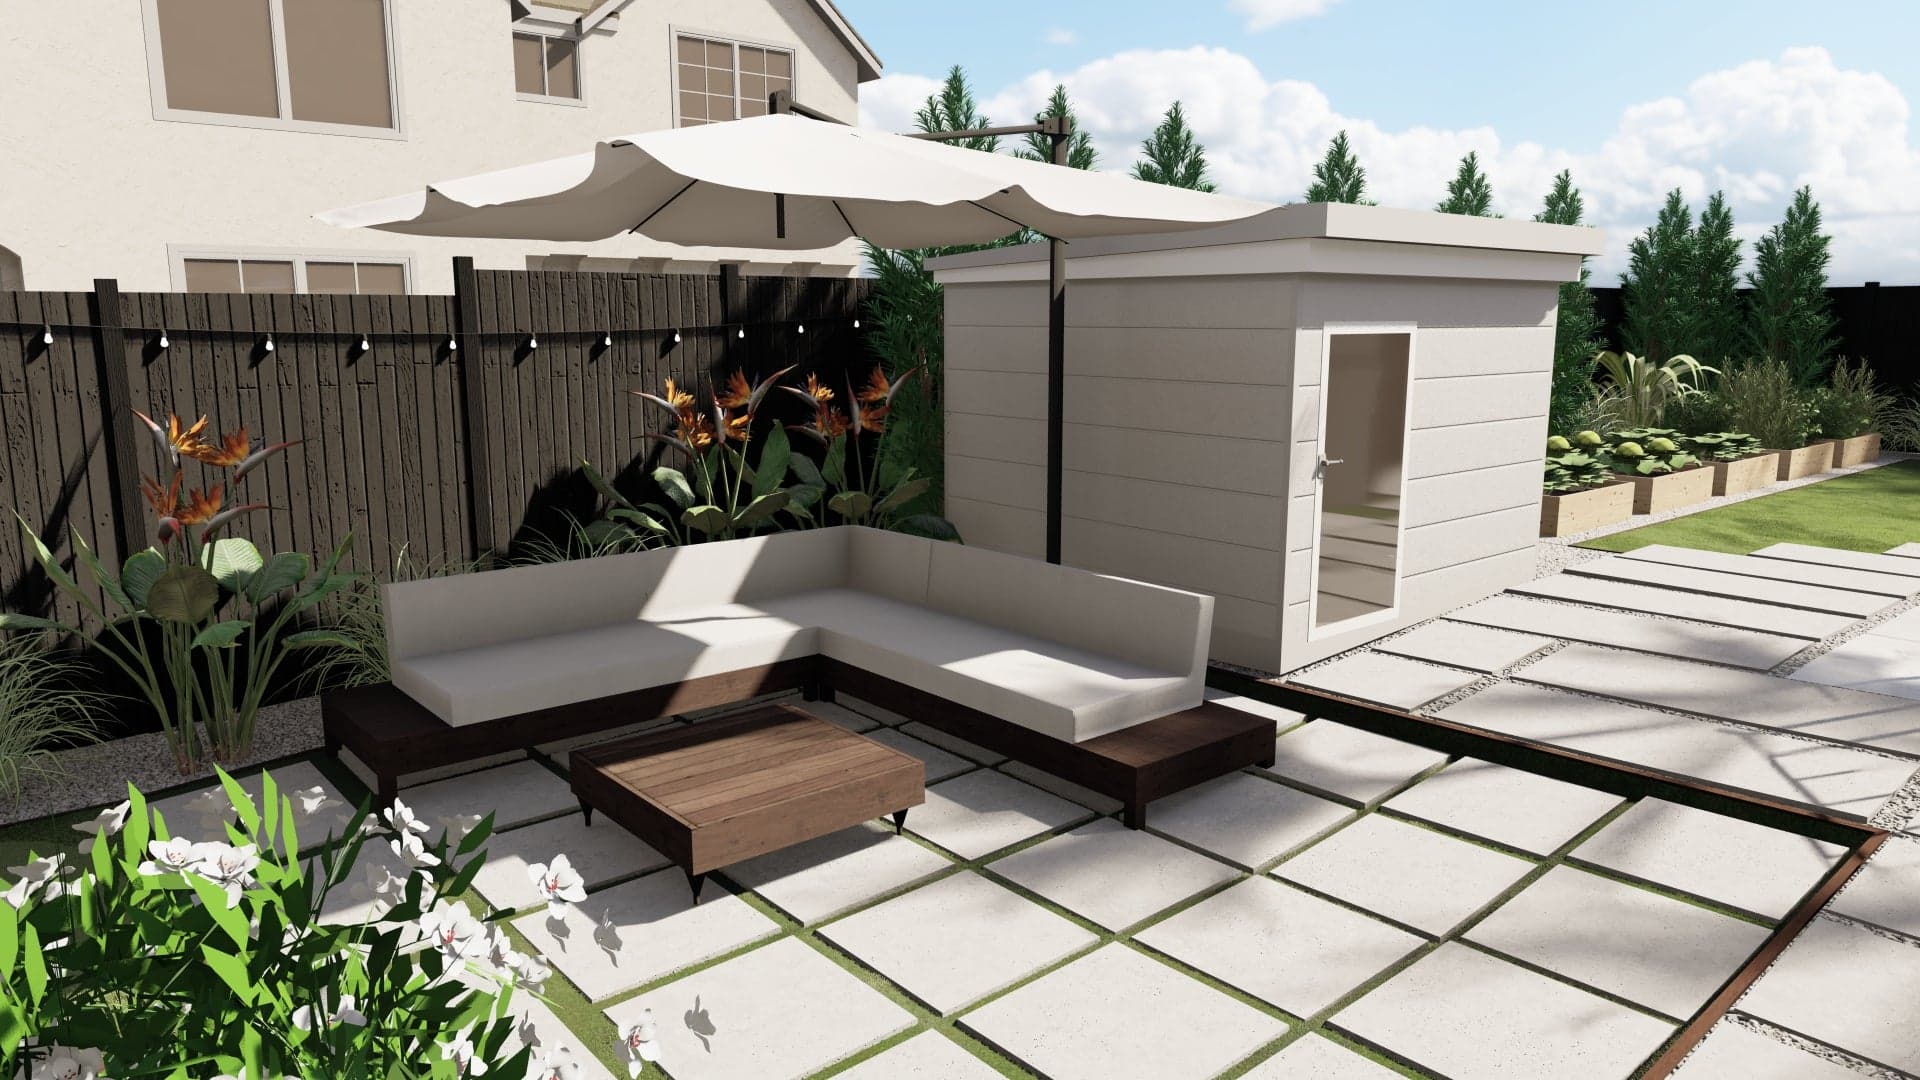 3D design render of backyard with concrete paver patio and lounge furniture